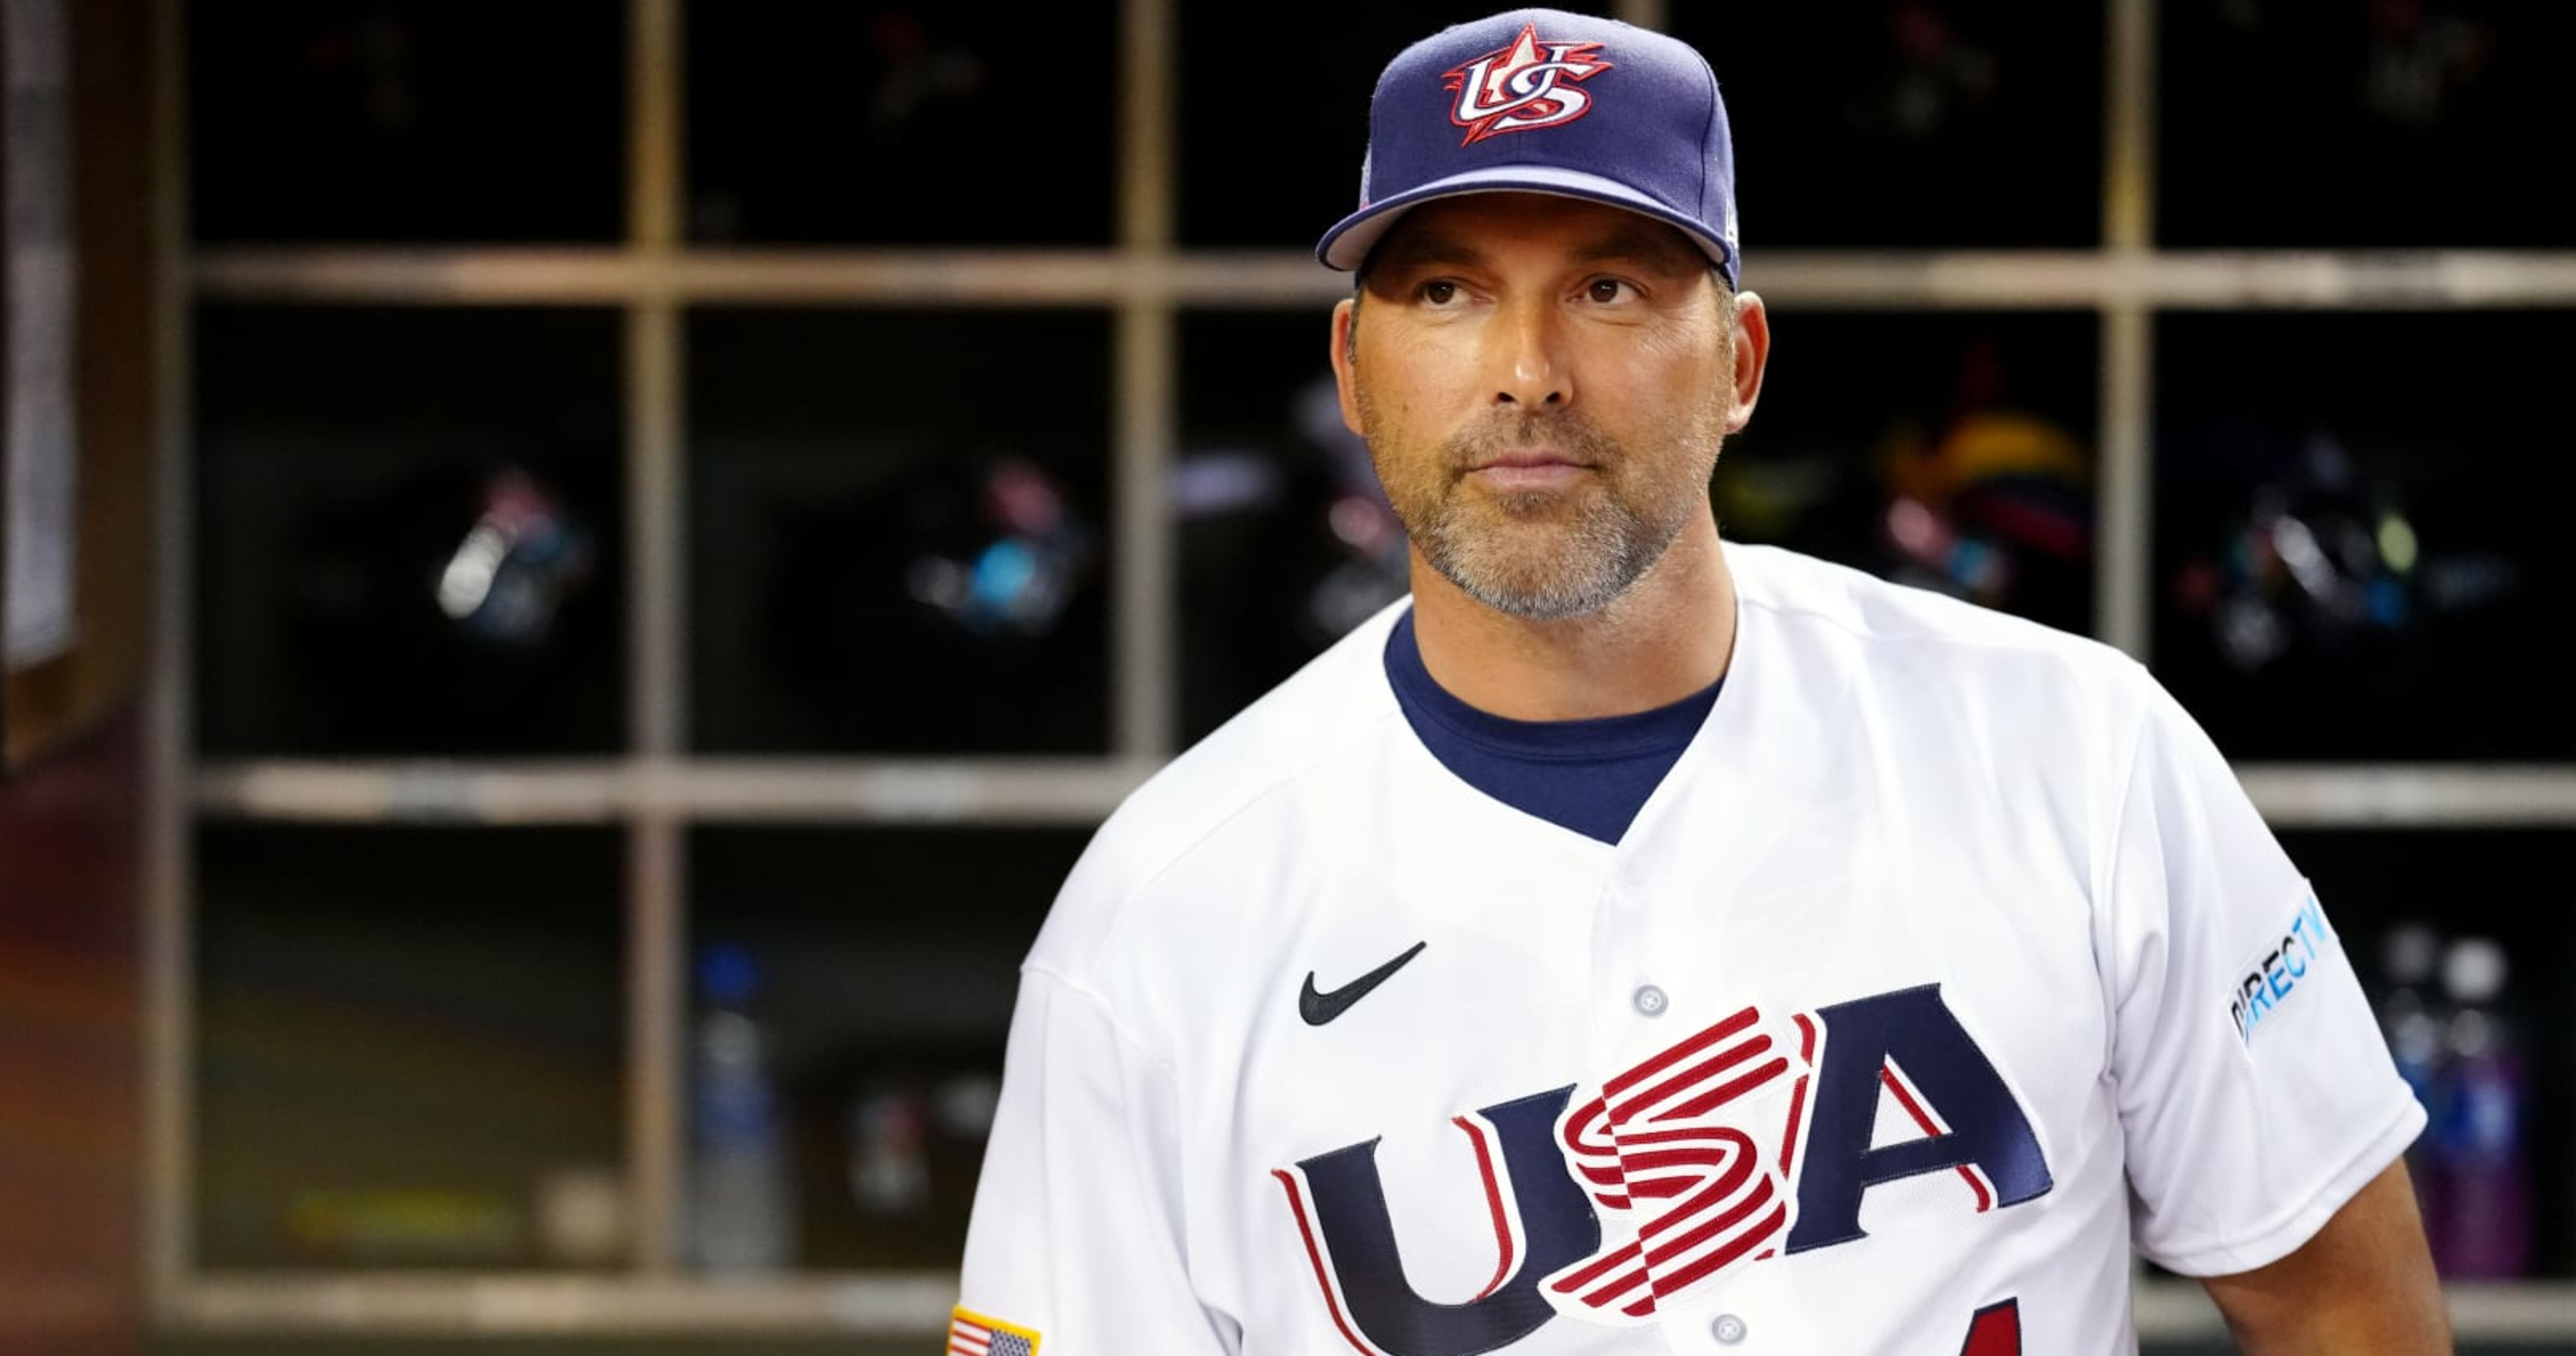 USA Manager Mark DeRosa Blamed by Fans for WBC Loss vs. Mexico over